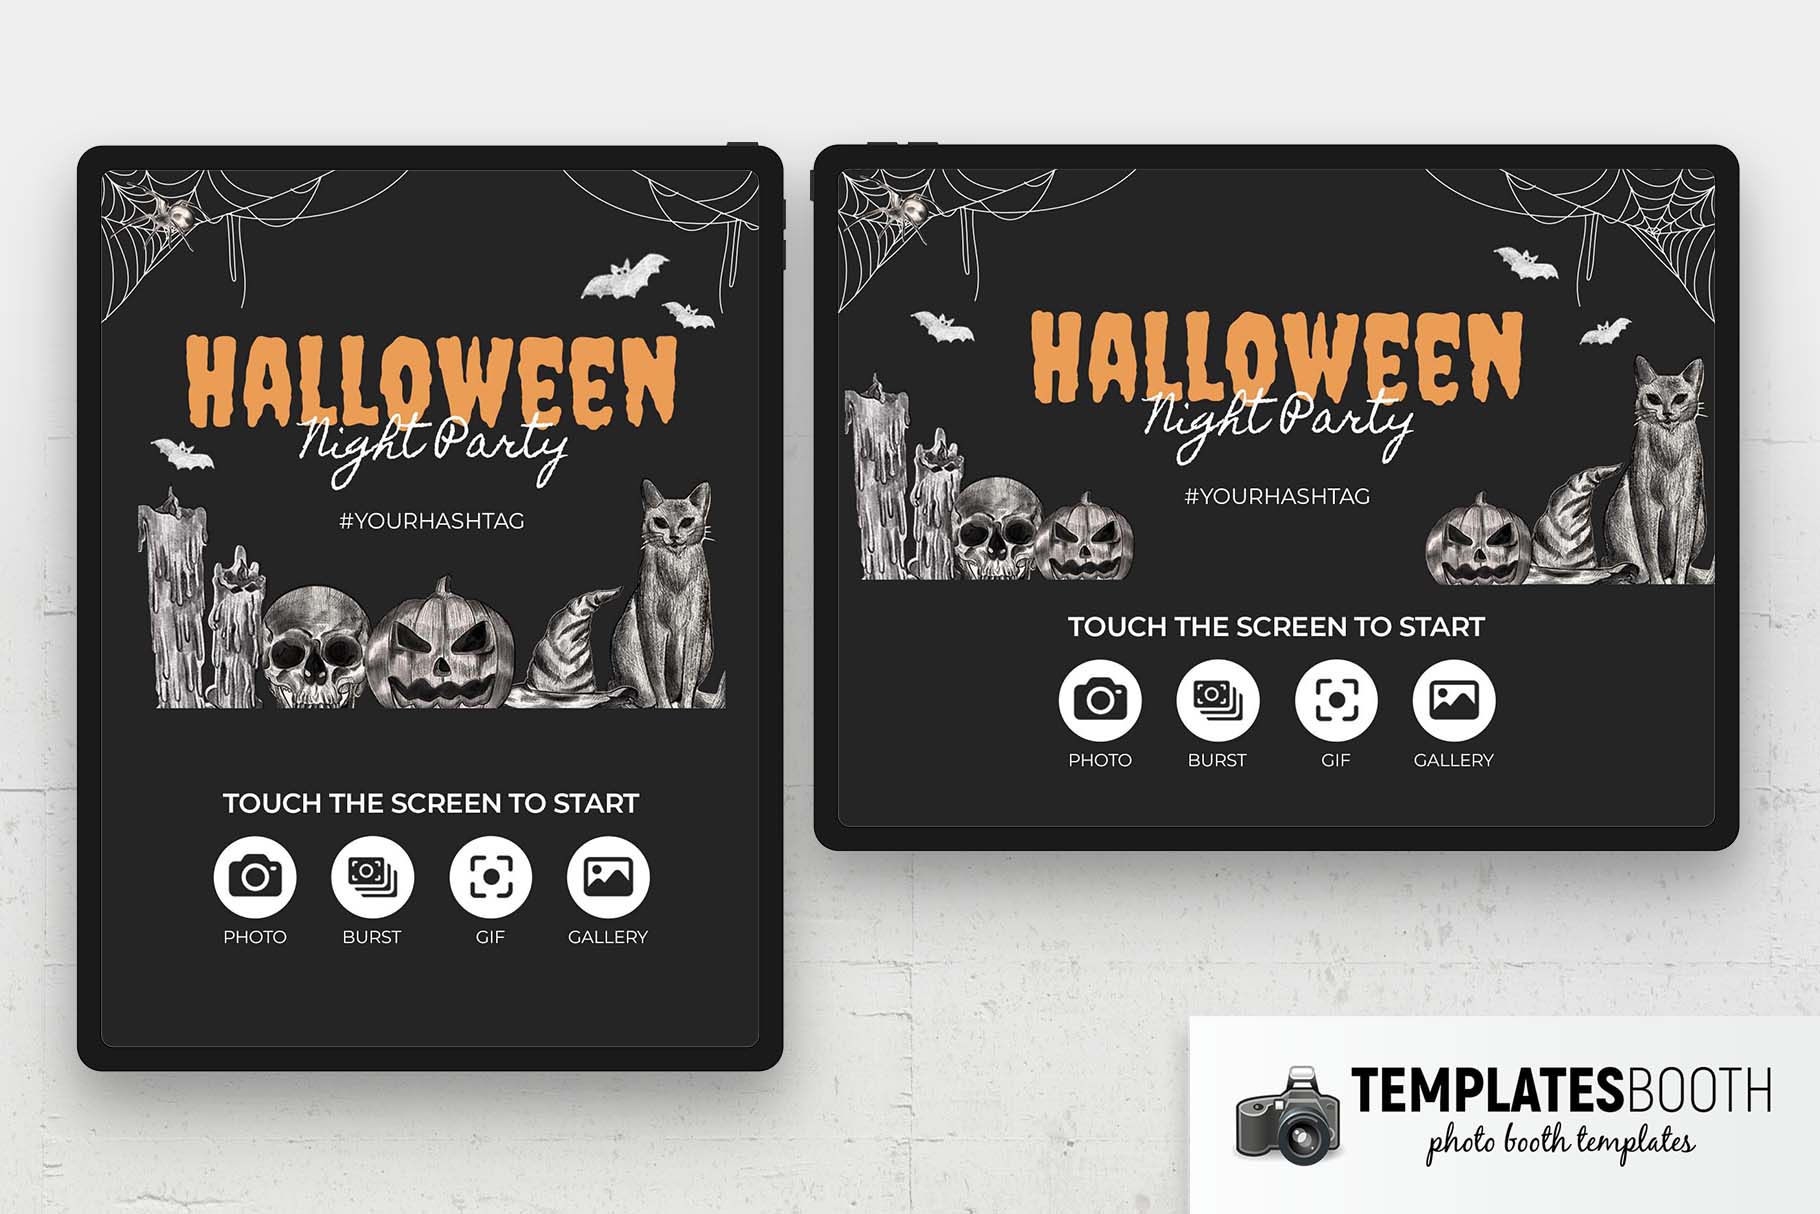 Hand Sketched Halloween Photo Booth Welcome Screen